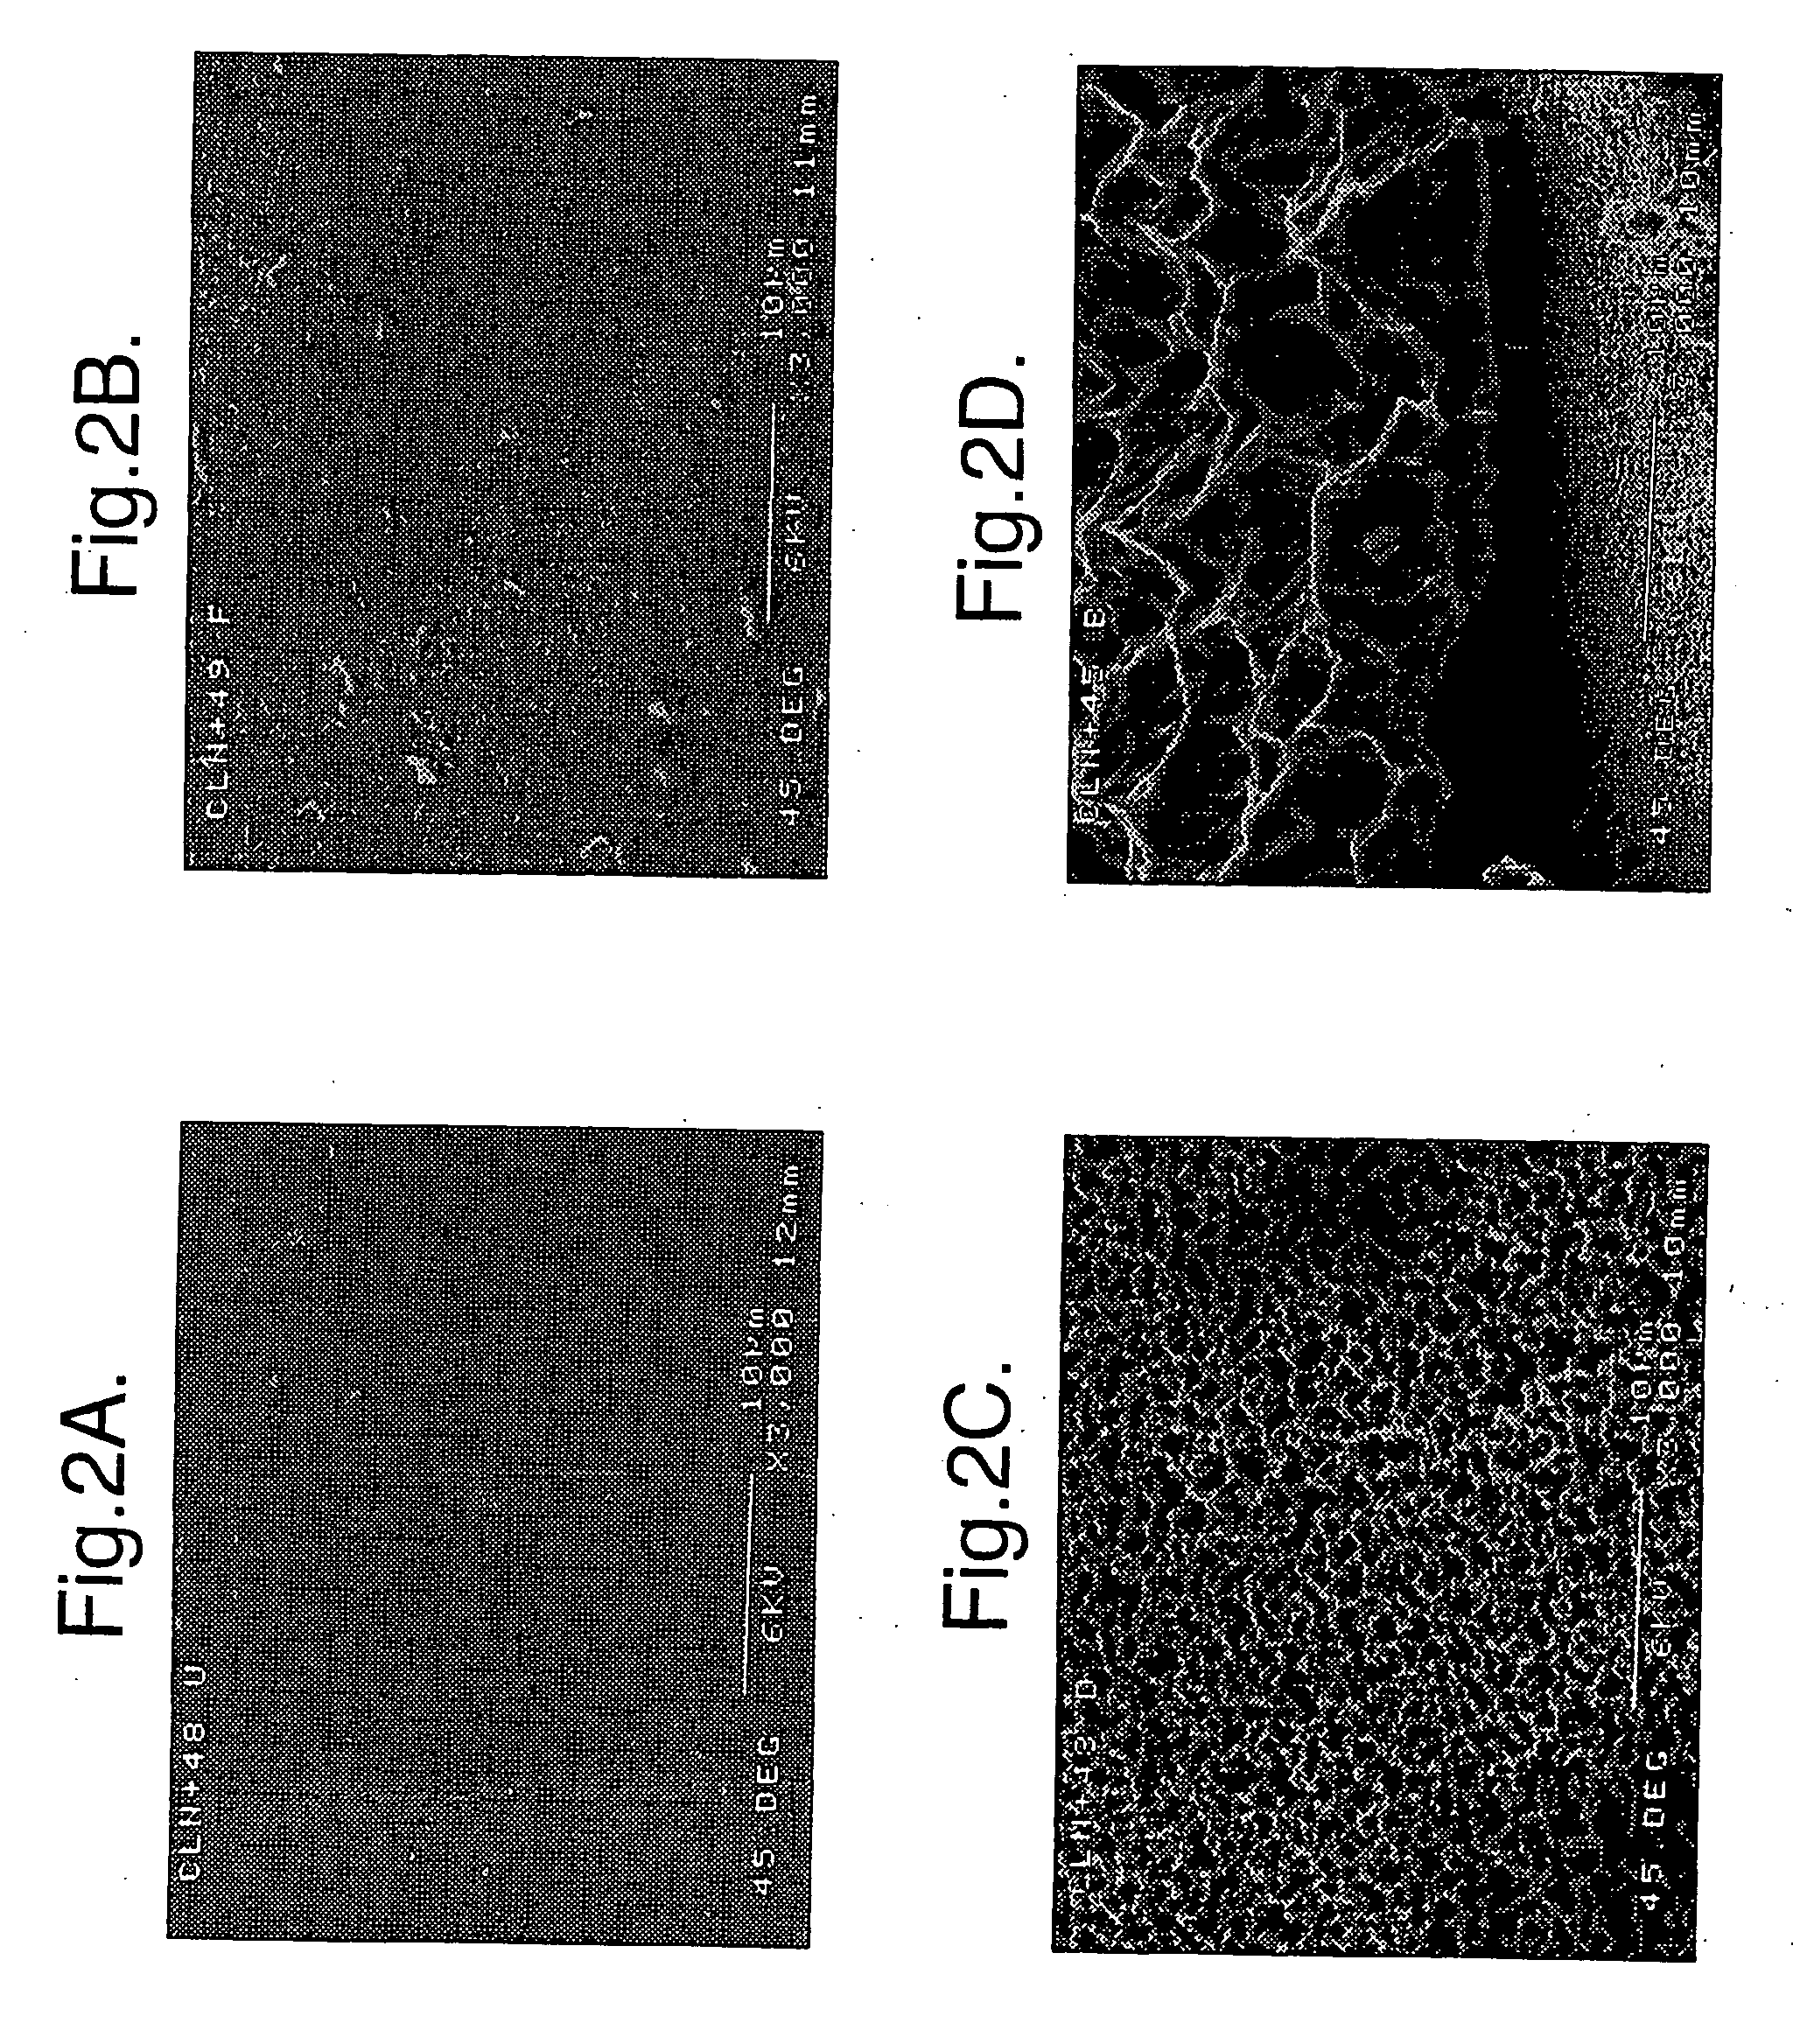 Implants for administering substances and methods of producing implants